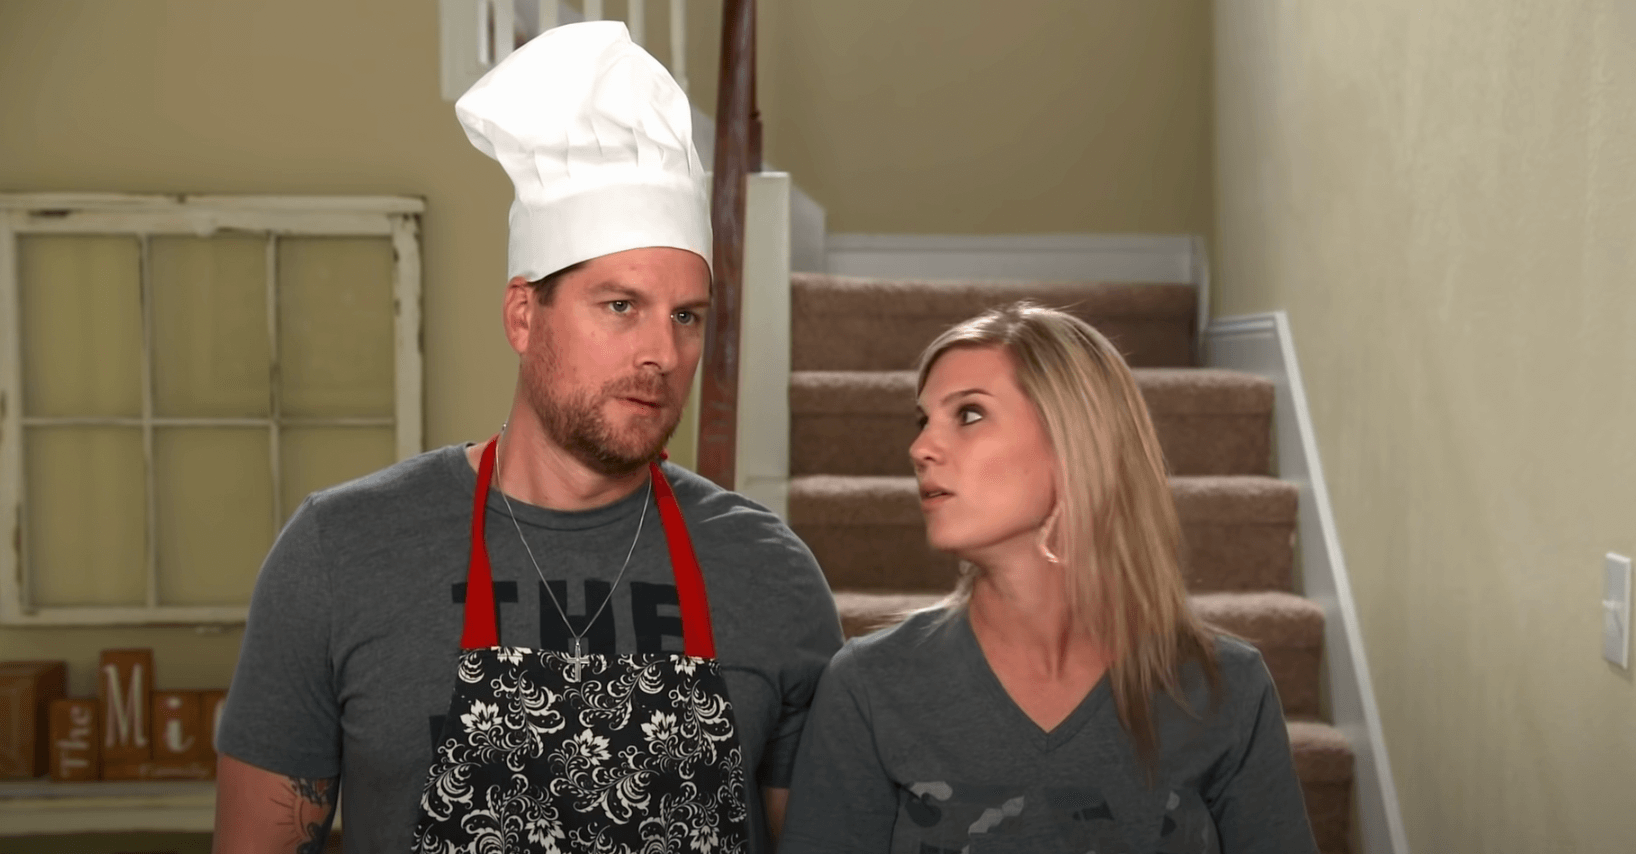 'OutDaughtered' star Uncle Dale and Aunt KiKi standing next to each other. Dale is wearing a chef's hat.